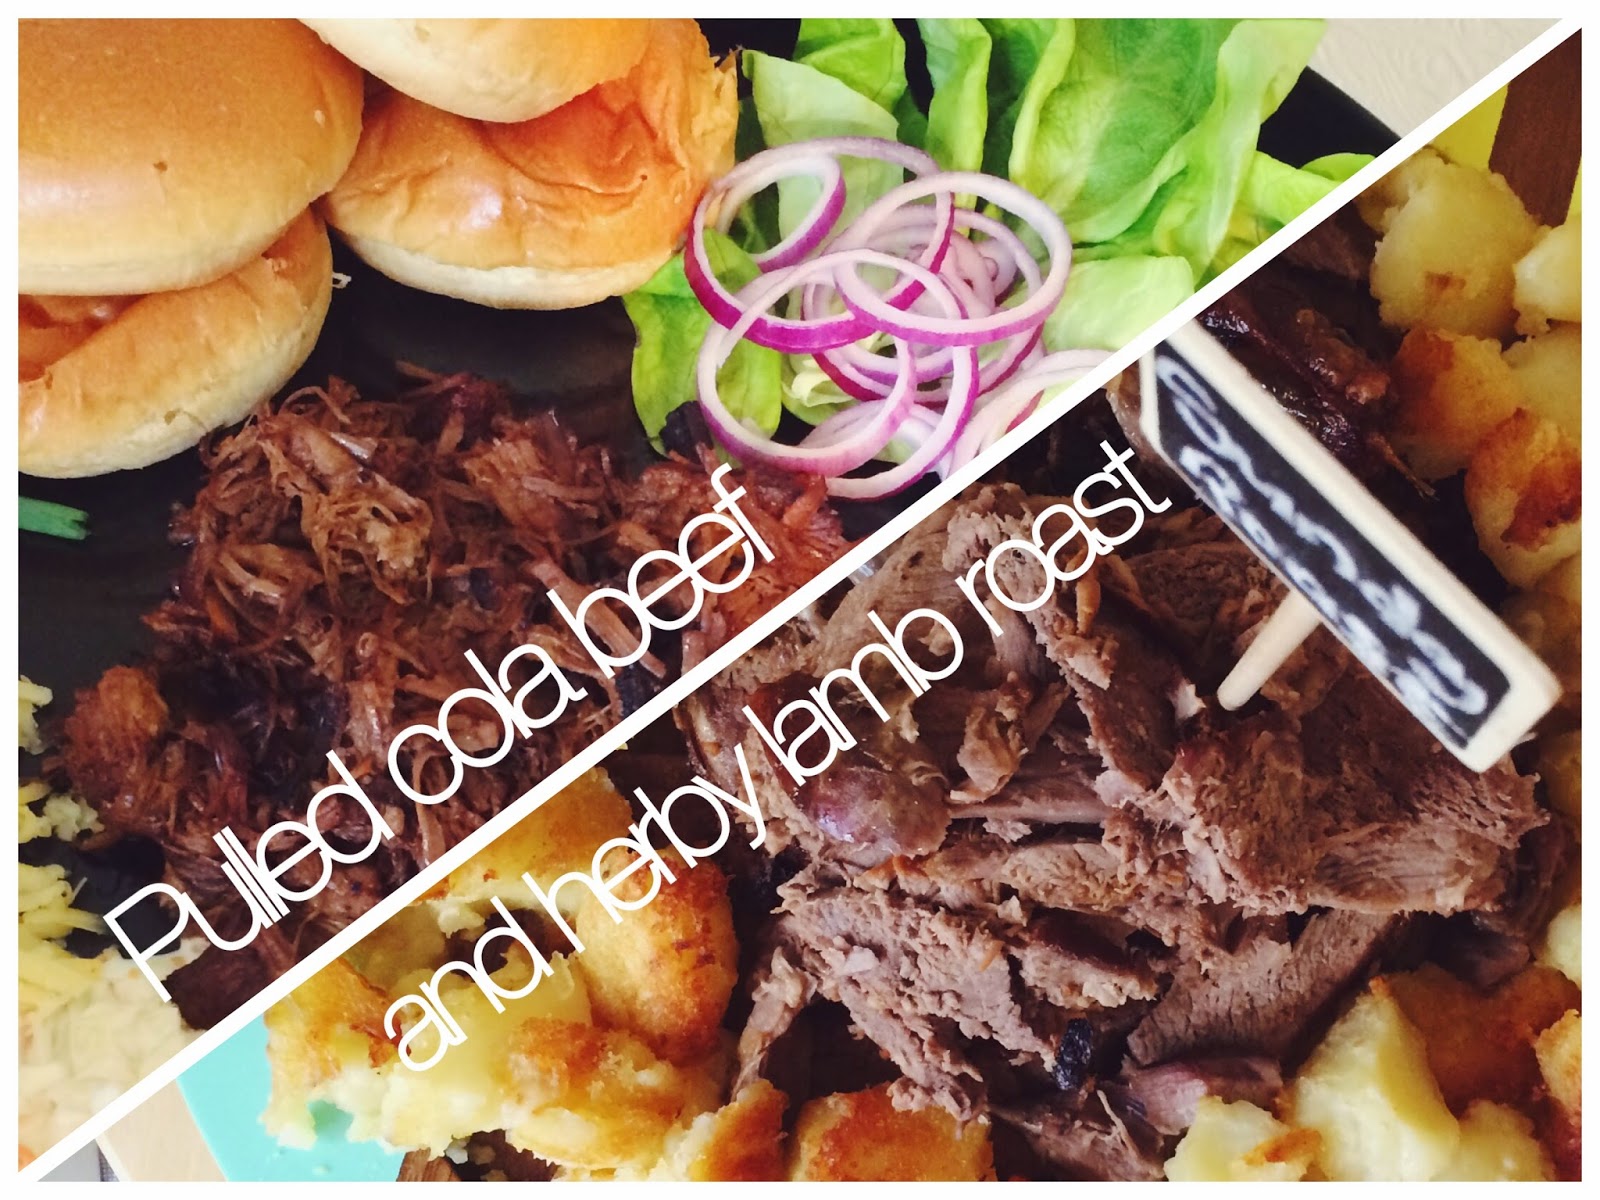 FashionFake a UK fashion and lifestyle blog. This Easter, I cooked up a feast of pulled beef slow cooked in cola sauce, and a roast lamb with a crust of garlic and herbs. These recipes are easy and delicious - perfect for a family get together!